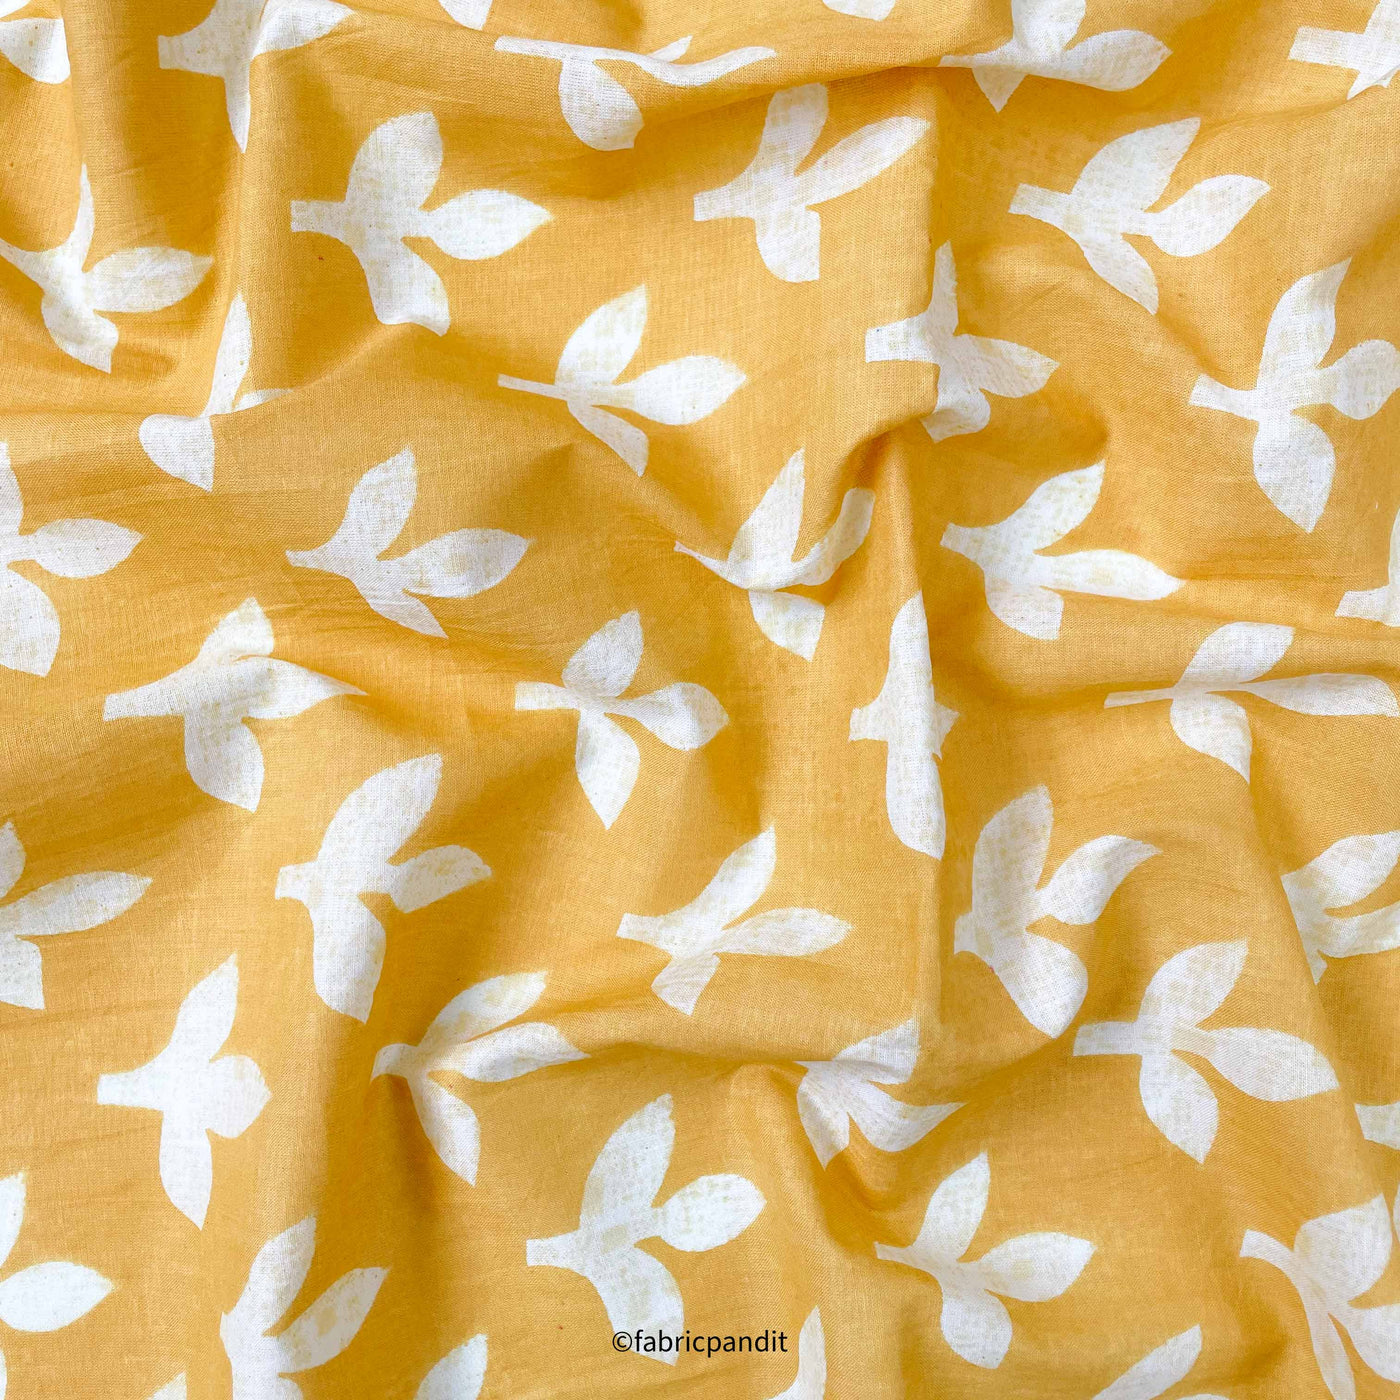 Hand Block Printed Cotton Fabric Cut Piece (CUT PIECE) Bright Yellow & White Autumn Leaves Hand Block Printed Pure Cotton Fabric (Width 42 inches)